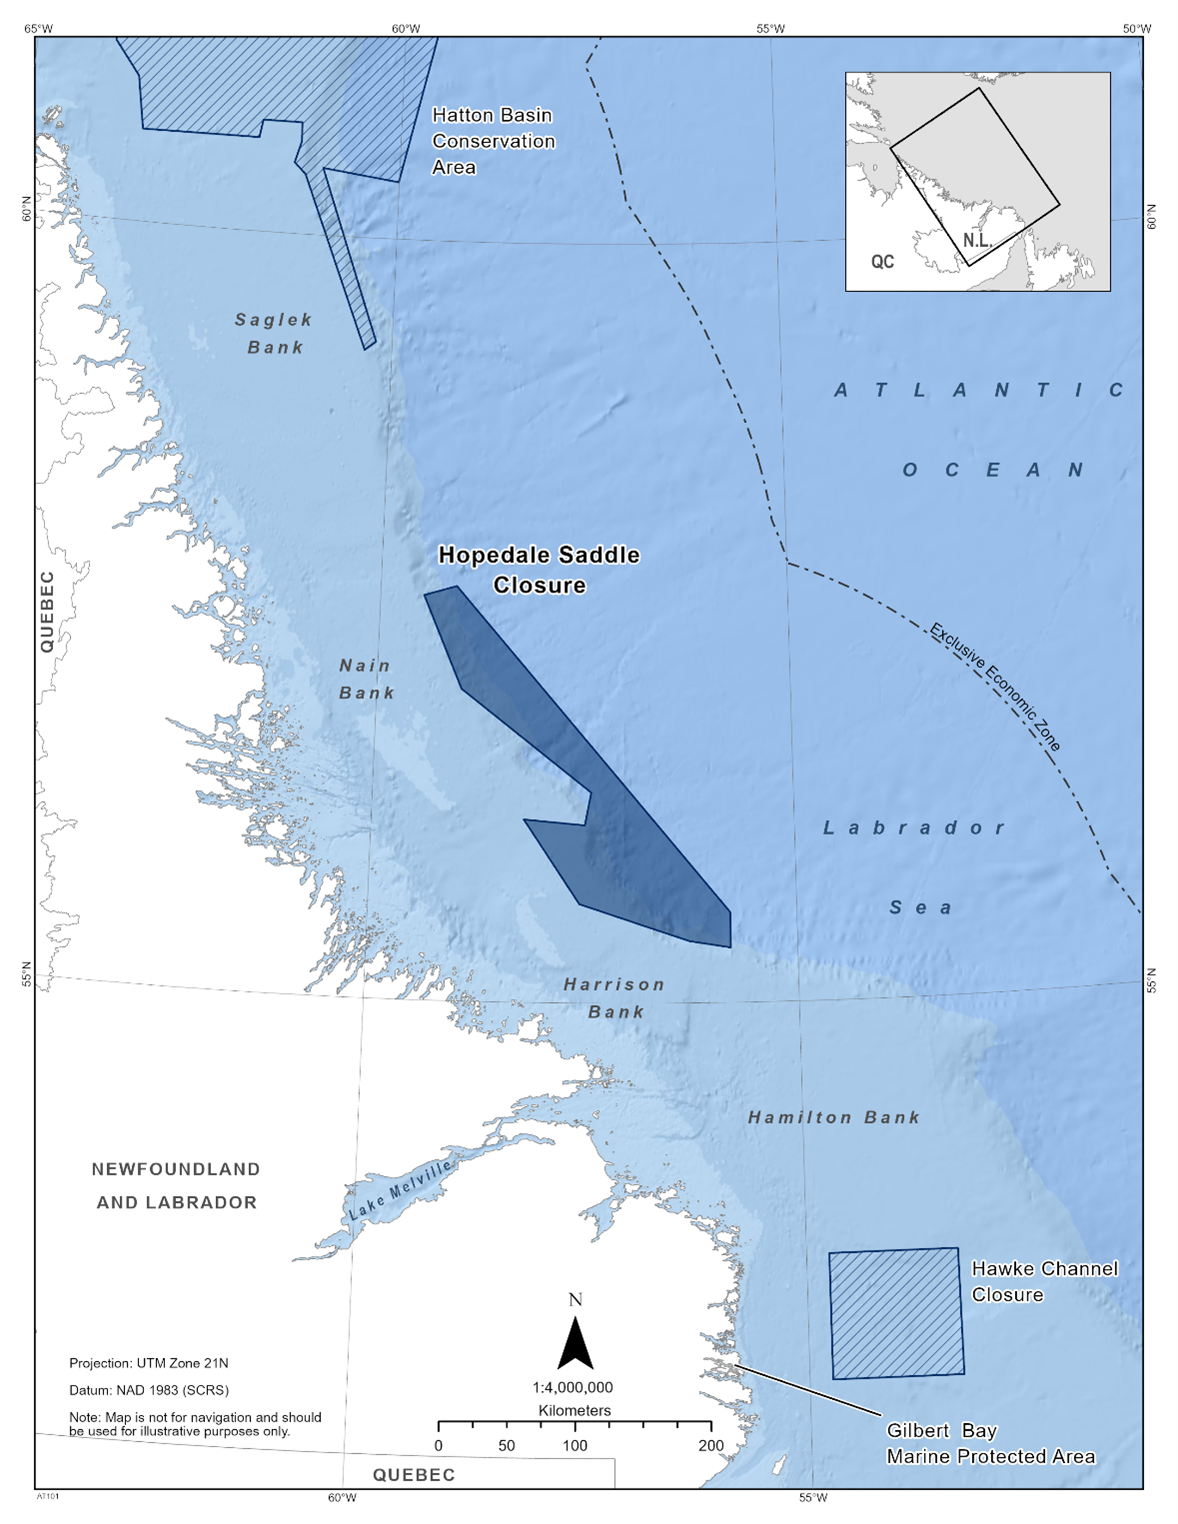 Map of the Hopedale Saddle Closure in dark blue. The map also features other marine refuges in the area with dark blue diagonal lines (Hatton Basin Conservation Area & Hawke Channel Closure).